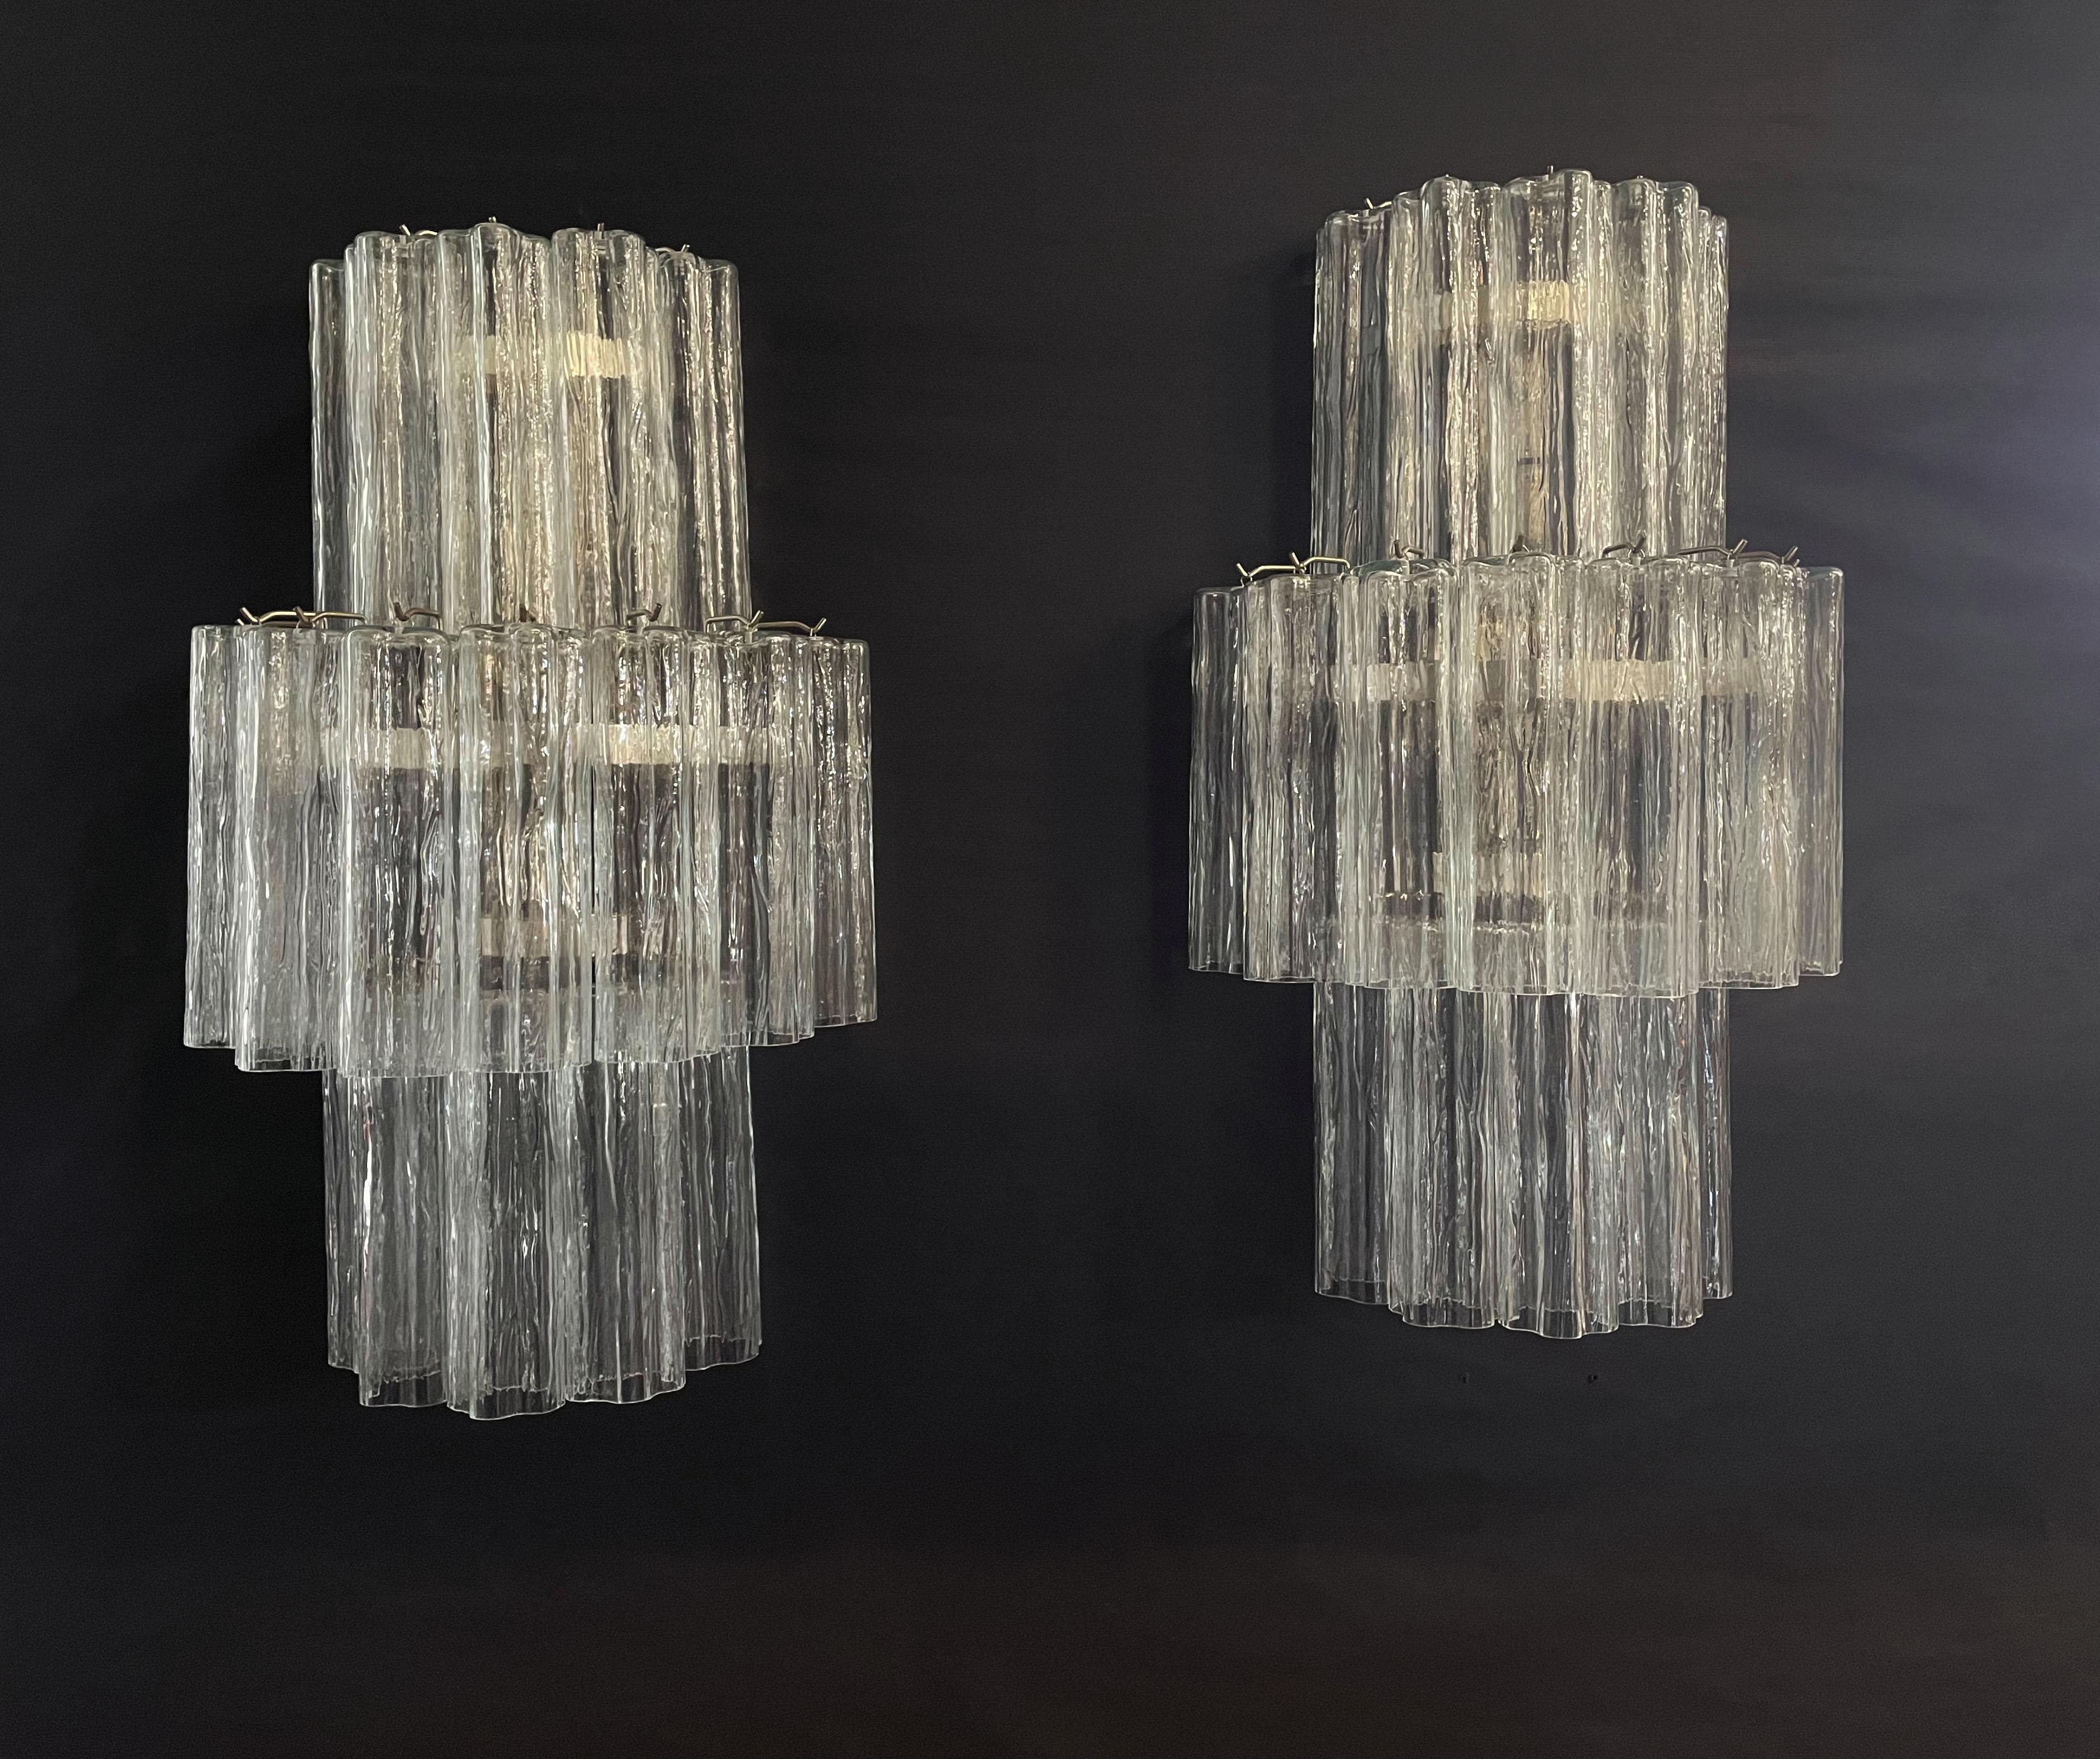 Italian vintage pair of wall sconces in Murano glass and nickel-plated metal structure. The armor polished nickel supports 18 large clear glass tubes in a star shape for each lamp.
Period: late XX century
Dimensions: 29 inches height (75 cm); 17